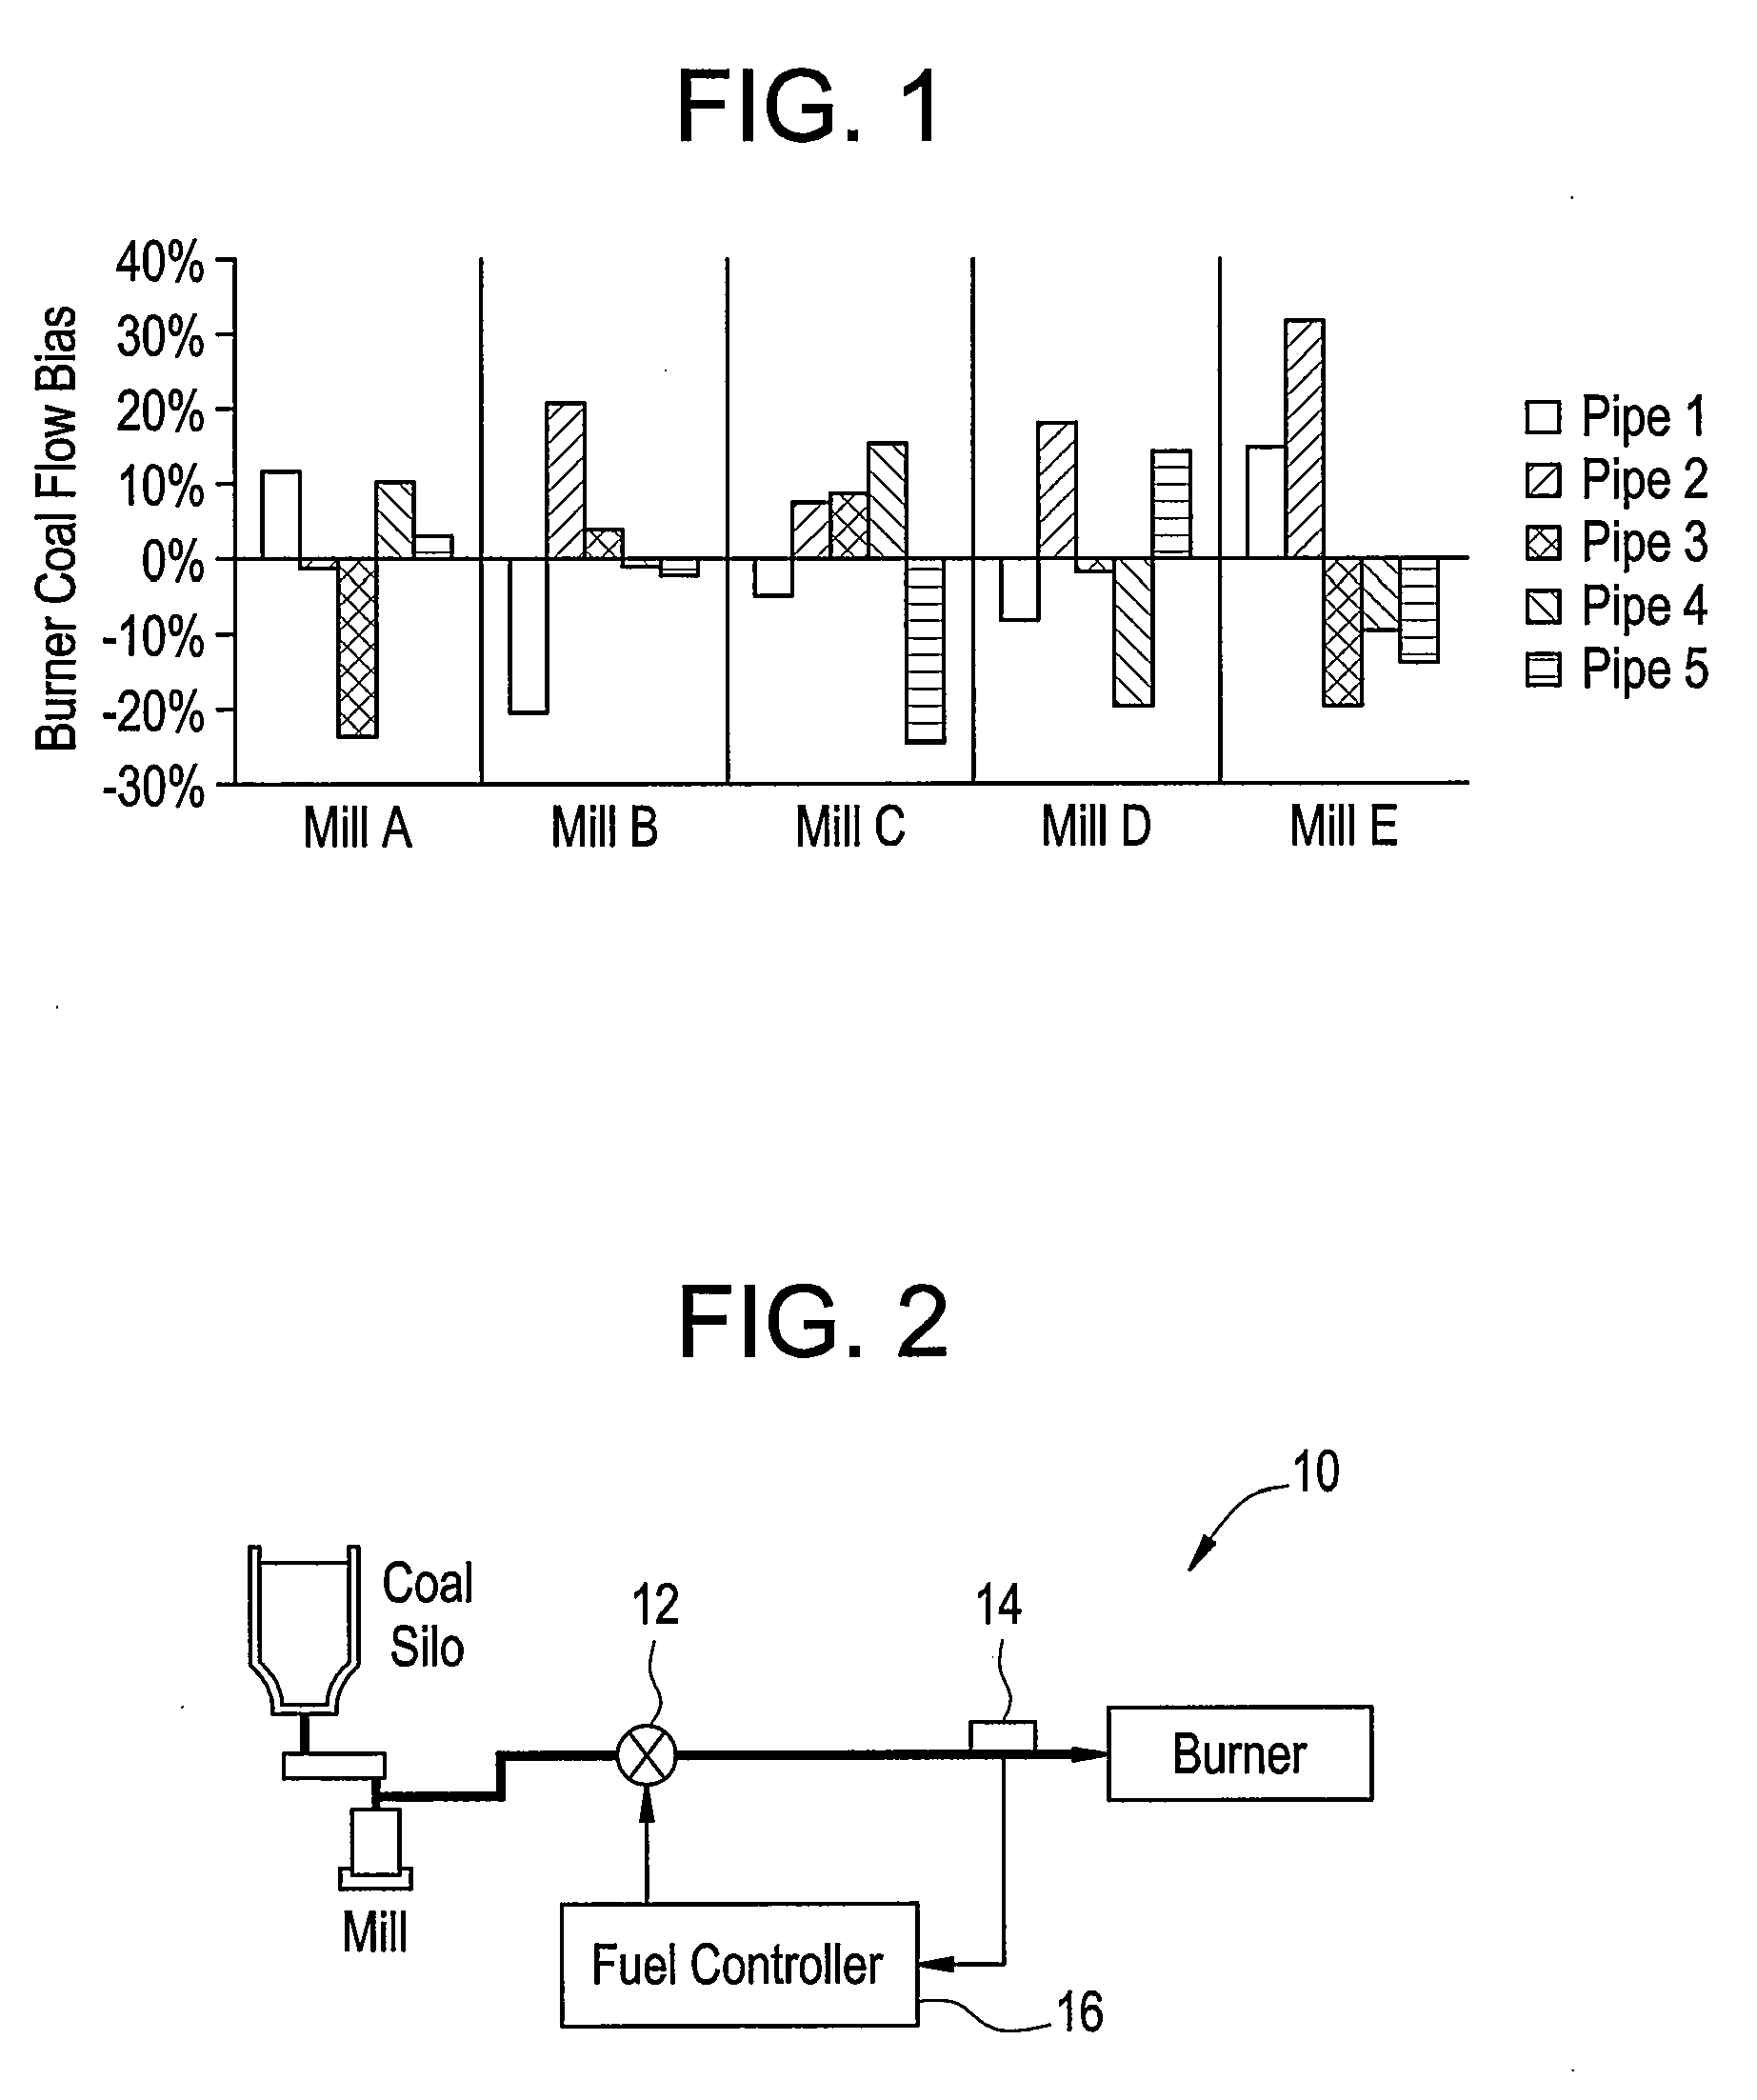 Method and System for controlling coal flow